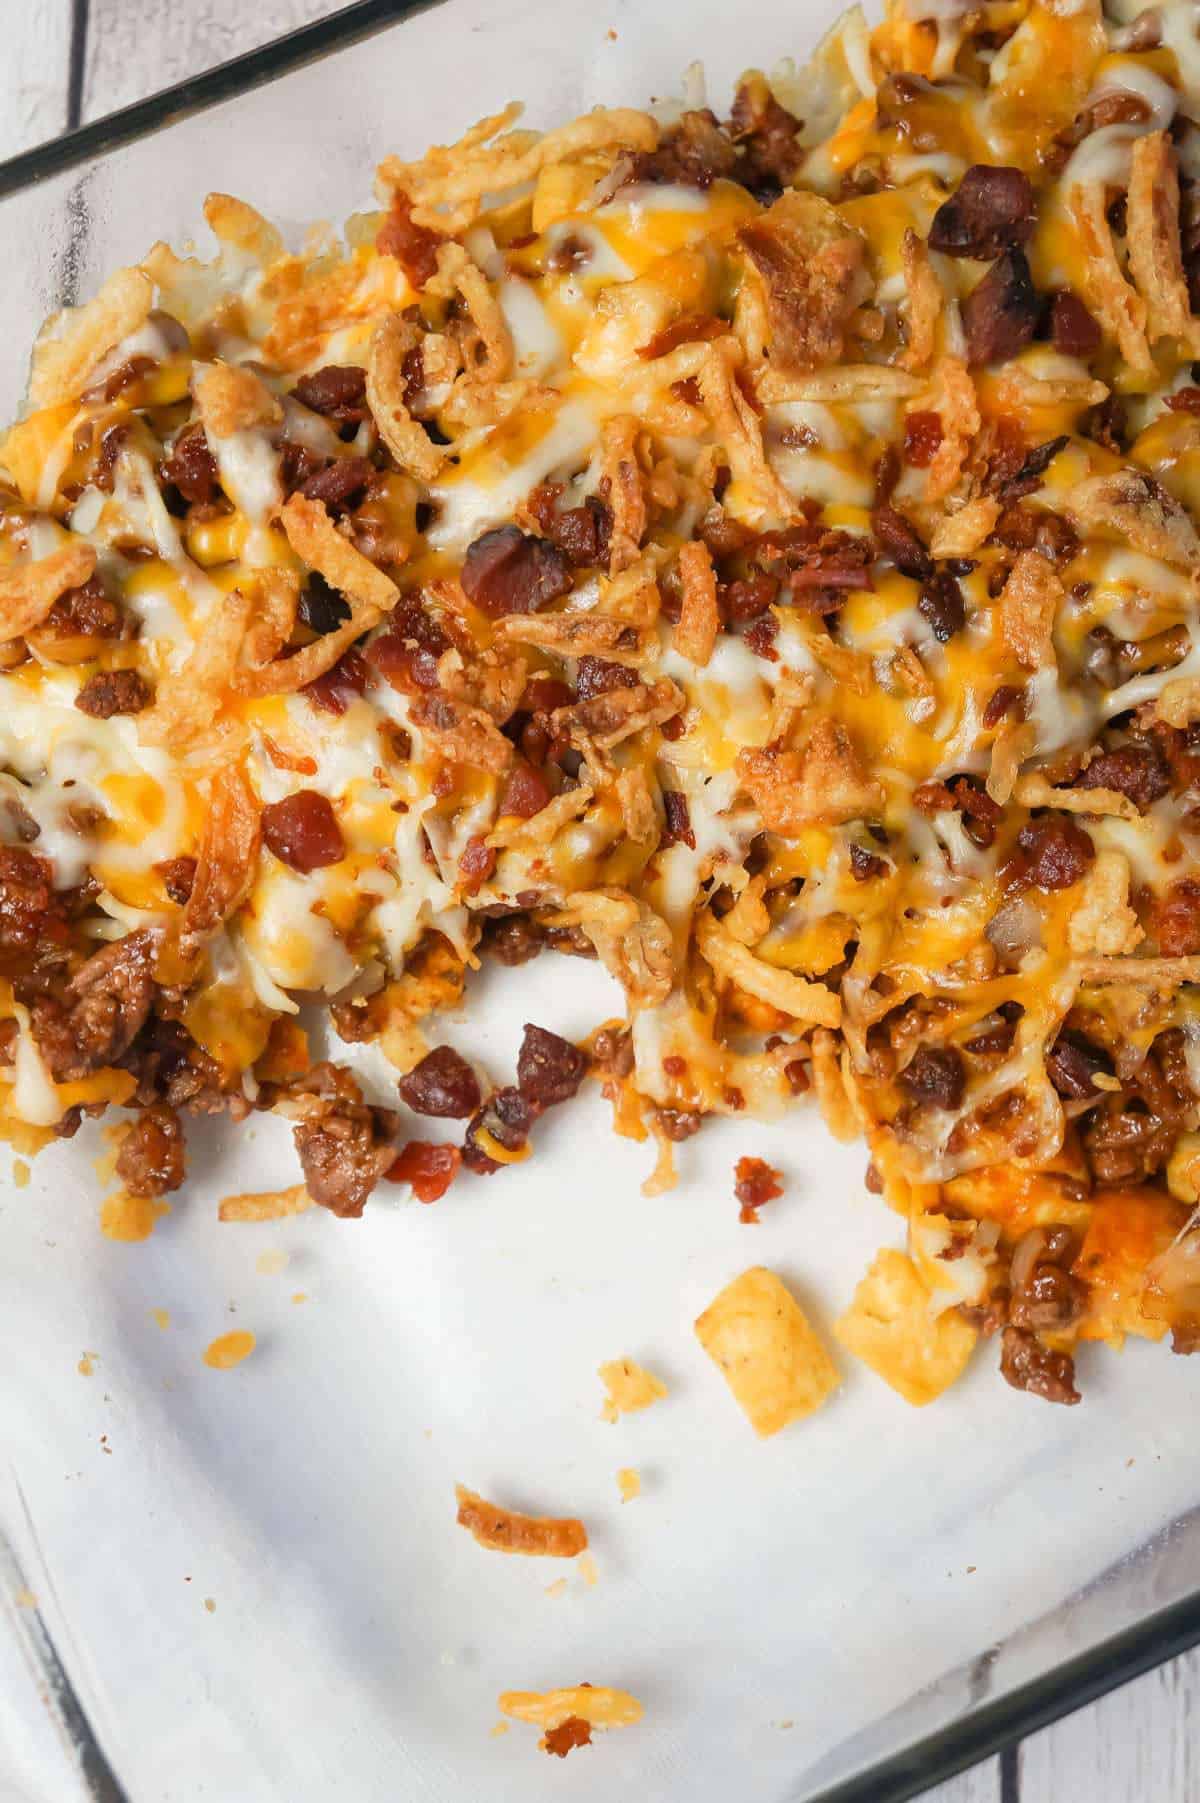 BBQ Bacon Cheeseburger Frito Pie is a delicous casserole with a base of Fritos corn chips, topped with ground beef and bacon crumble tossed in BBQ sauce, shredded cheese and French's fried onions.